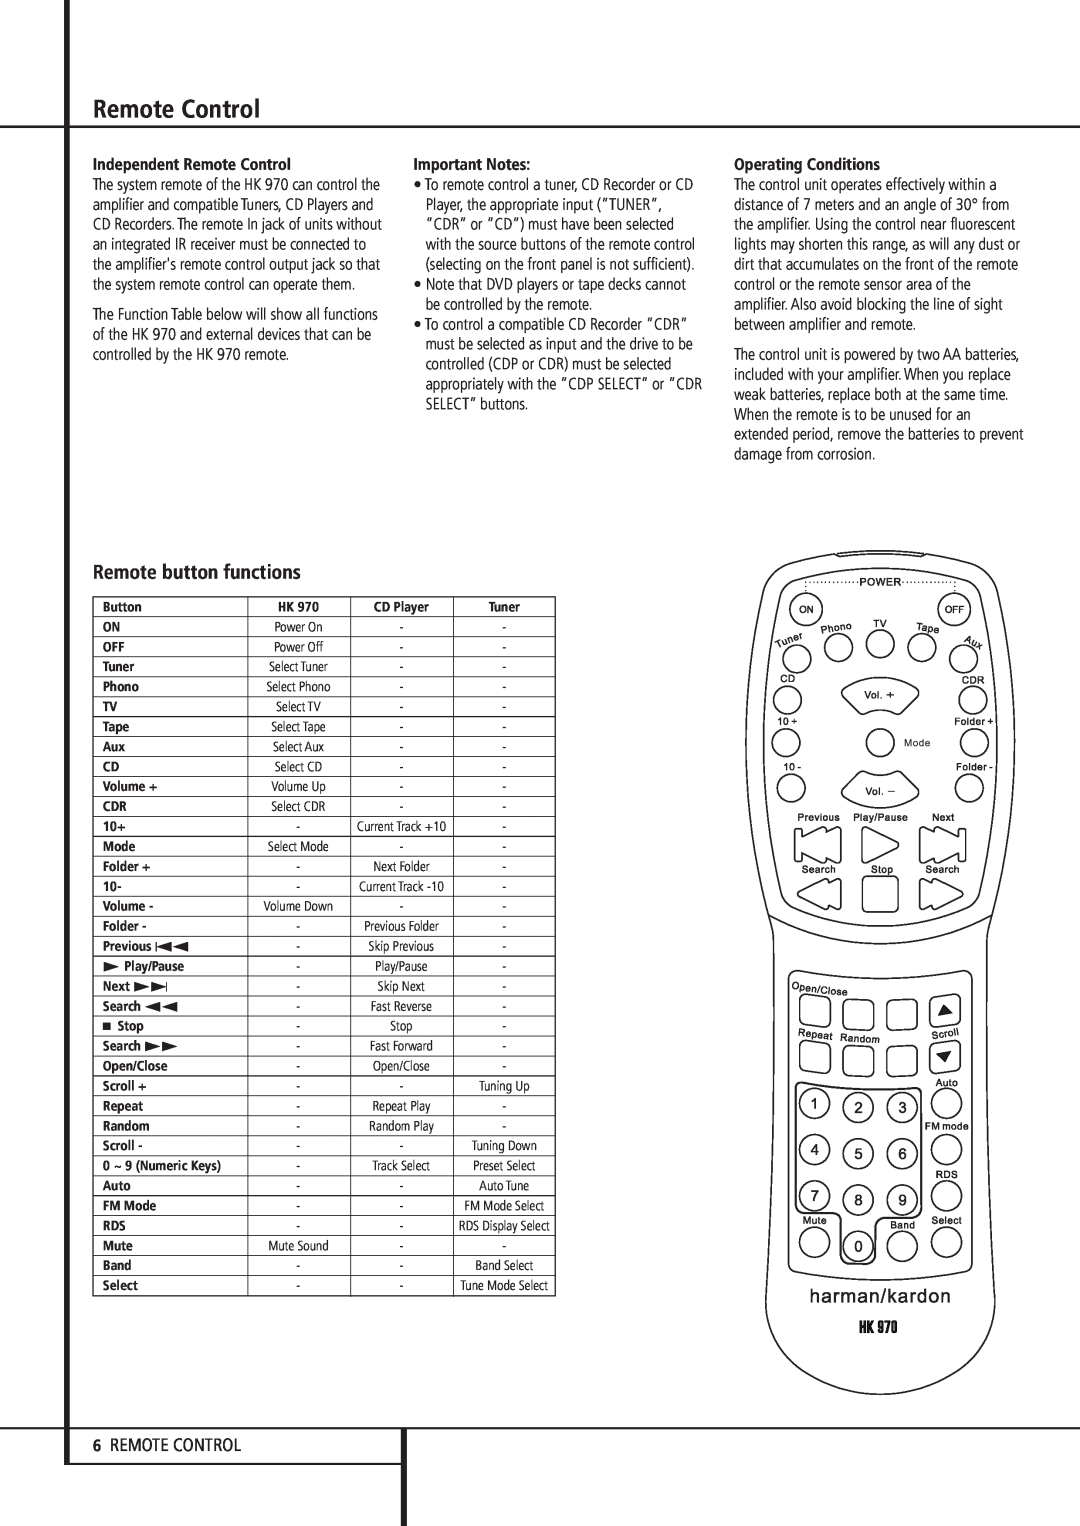 Harman-Kardon HK 970 owner manual Remote button functions, 6REMOTE CONTROL, Independent Remote Control, Important Notes 